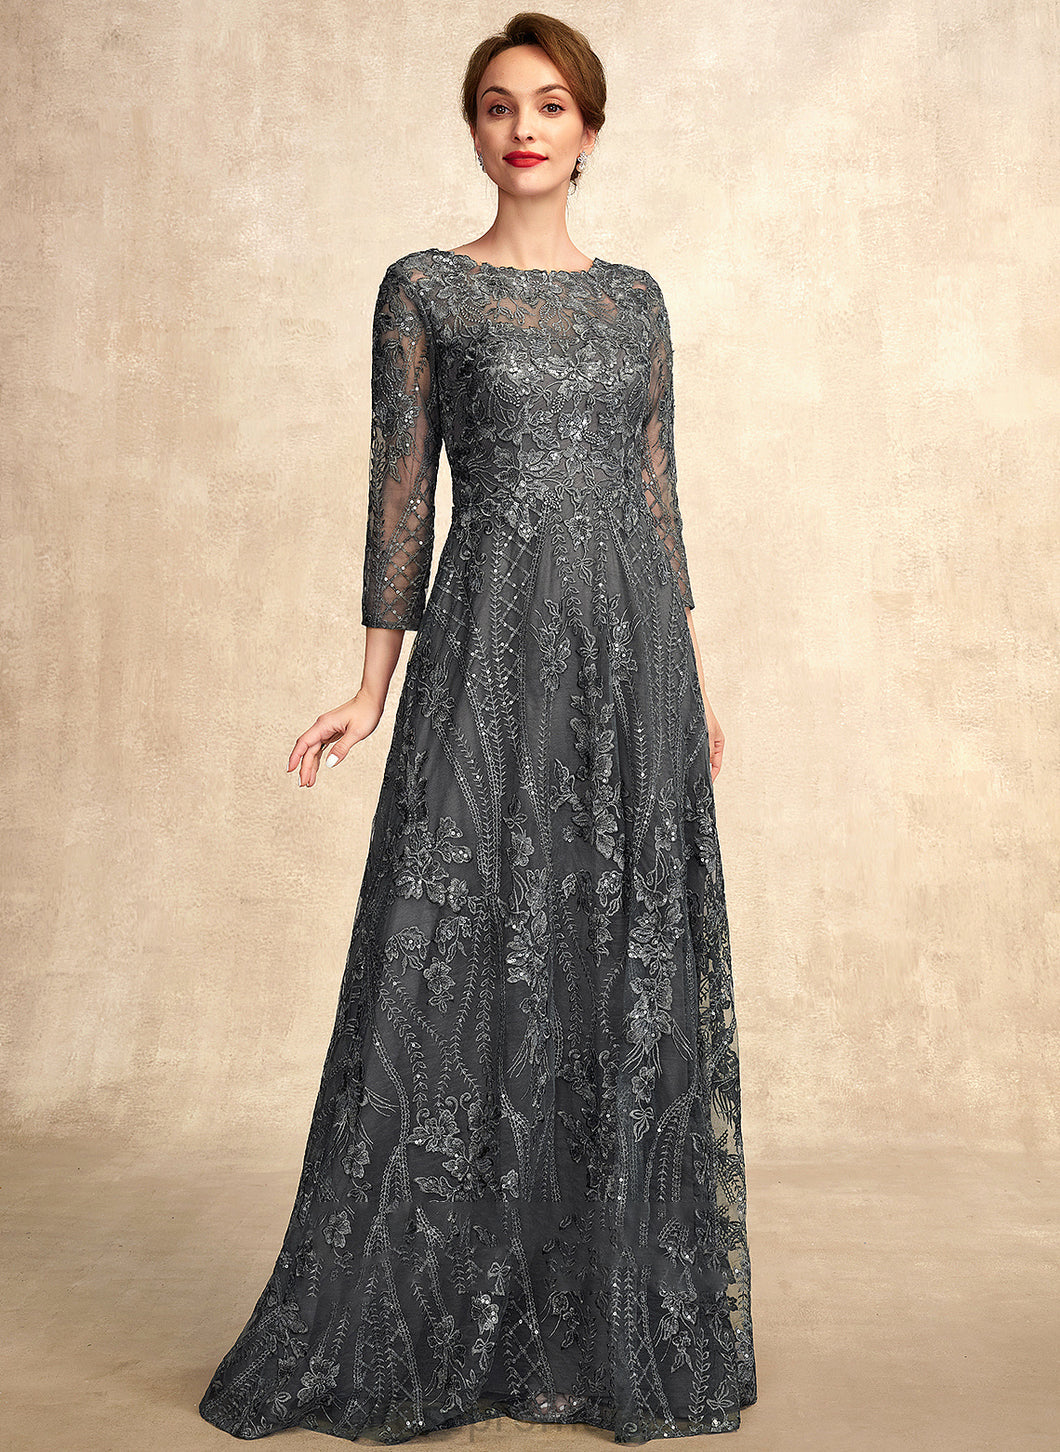 Mother of the Bride Dresses Lace Bride the Scoop of Neck Dress With Floor-Length Avah Sequins A-Line Mother